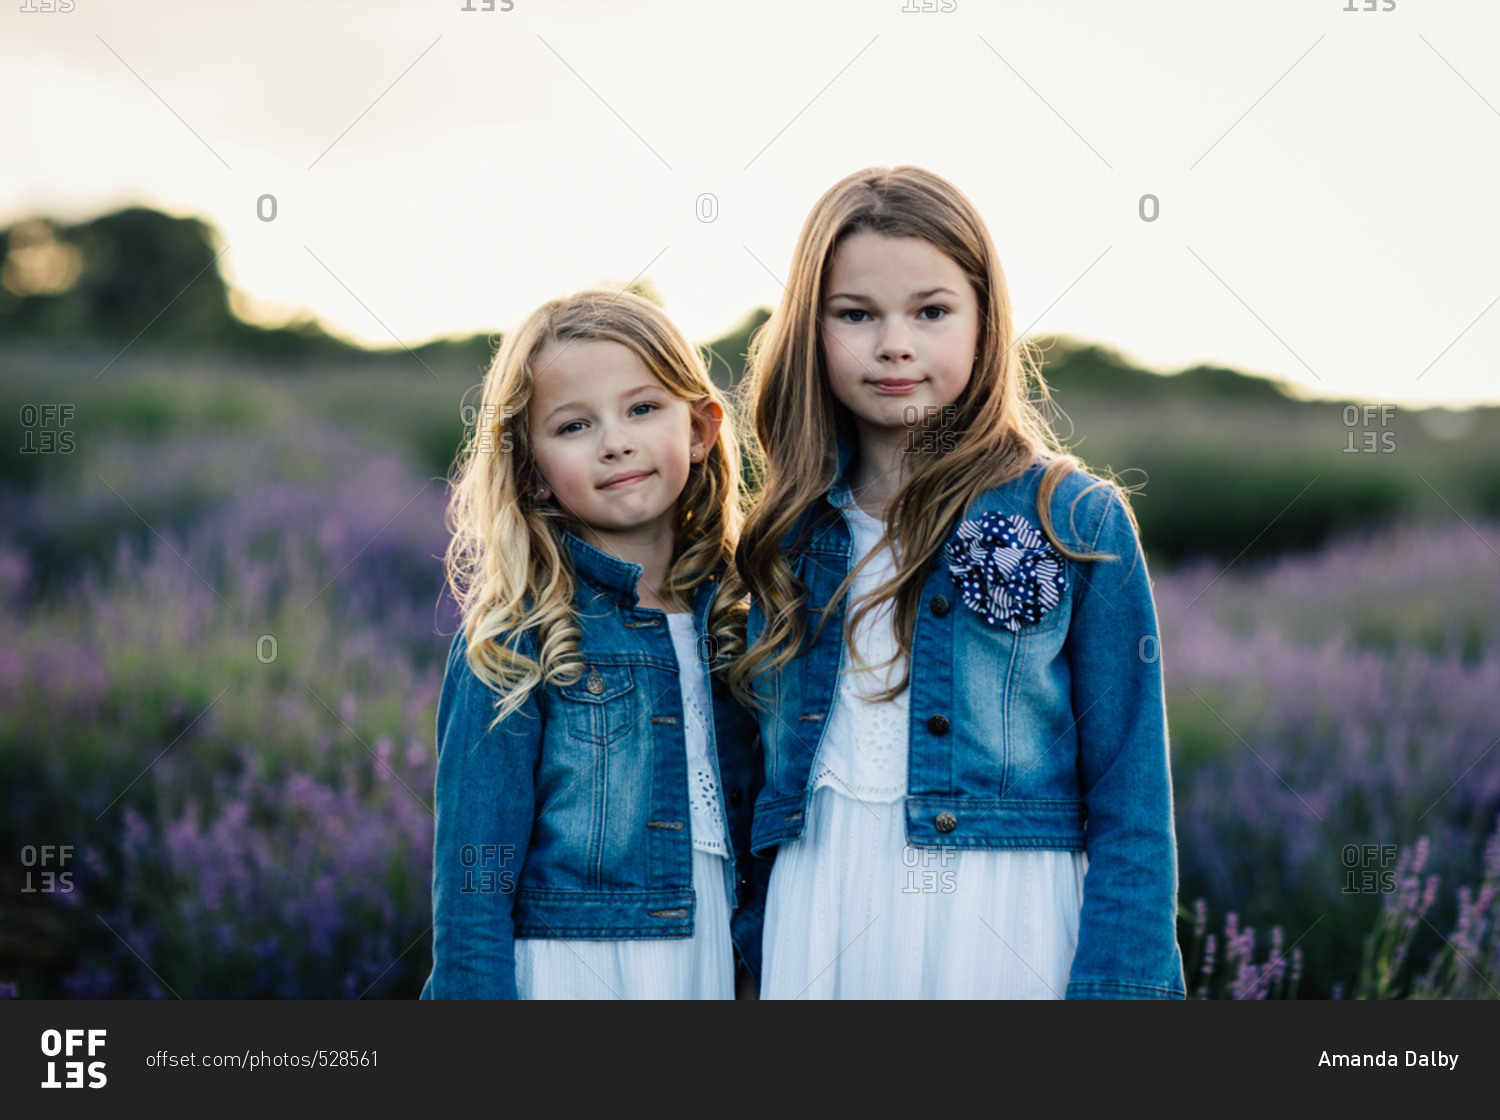 Portrait of two girls standing together in a field of purple lavender flowers